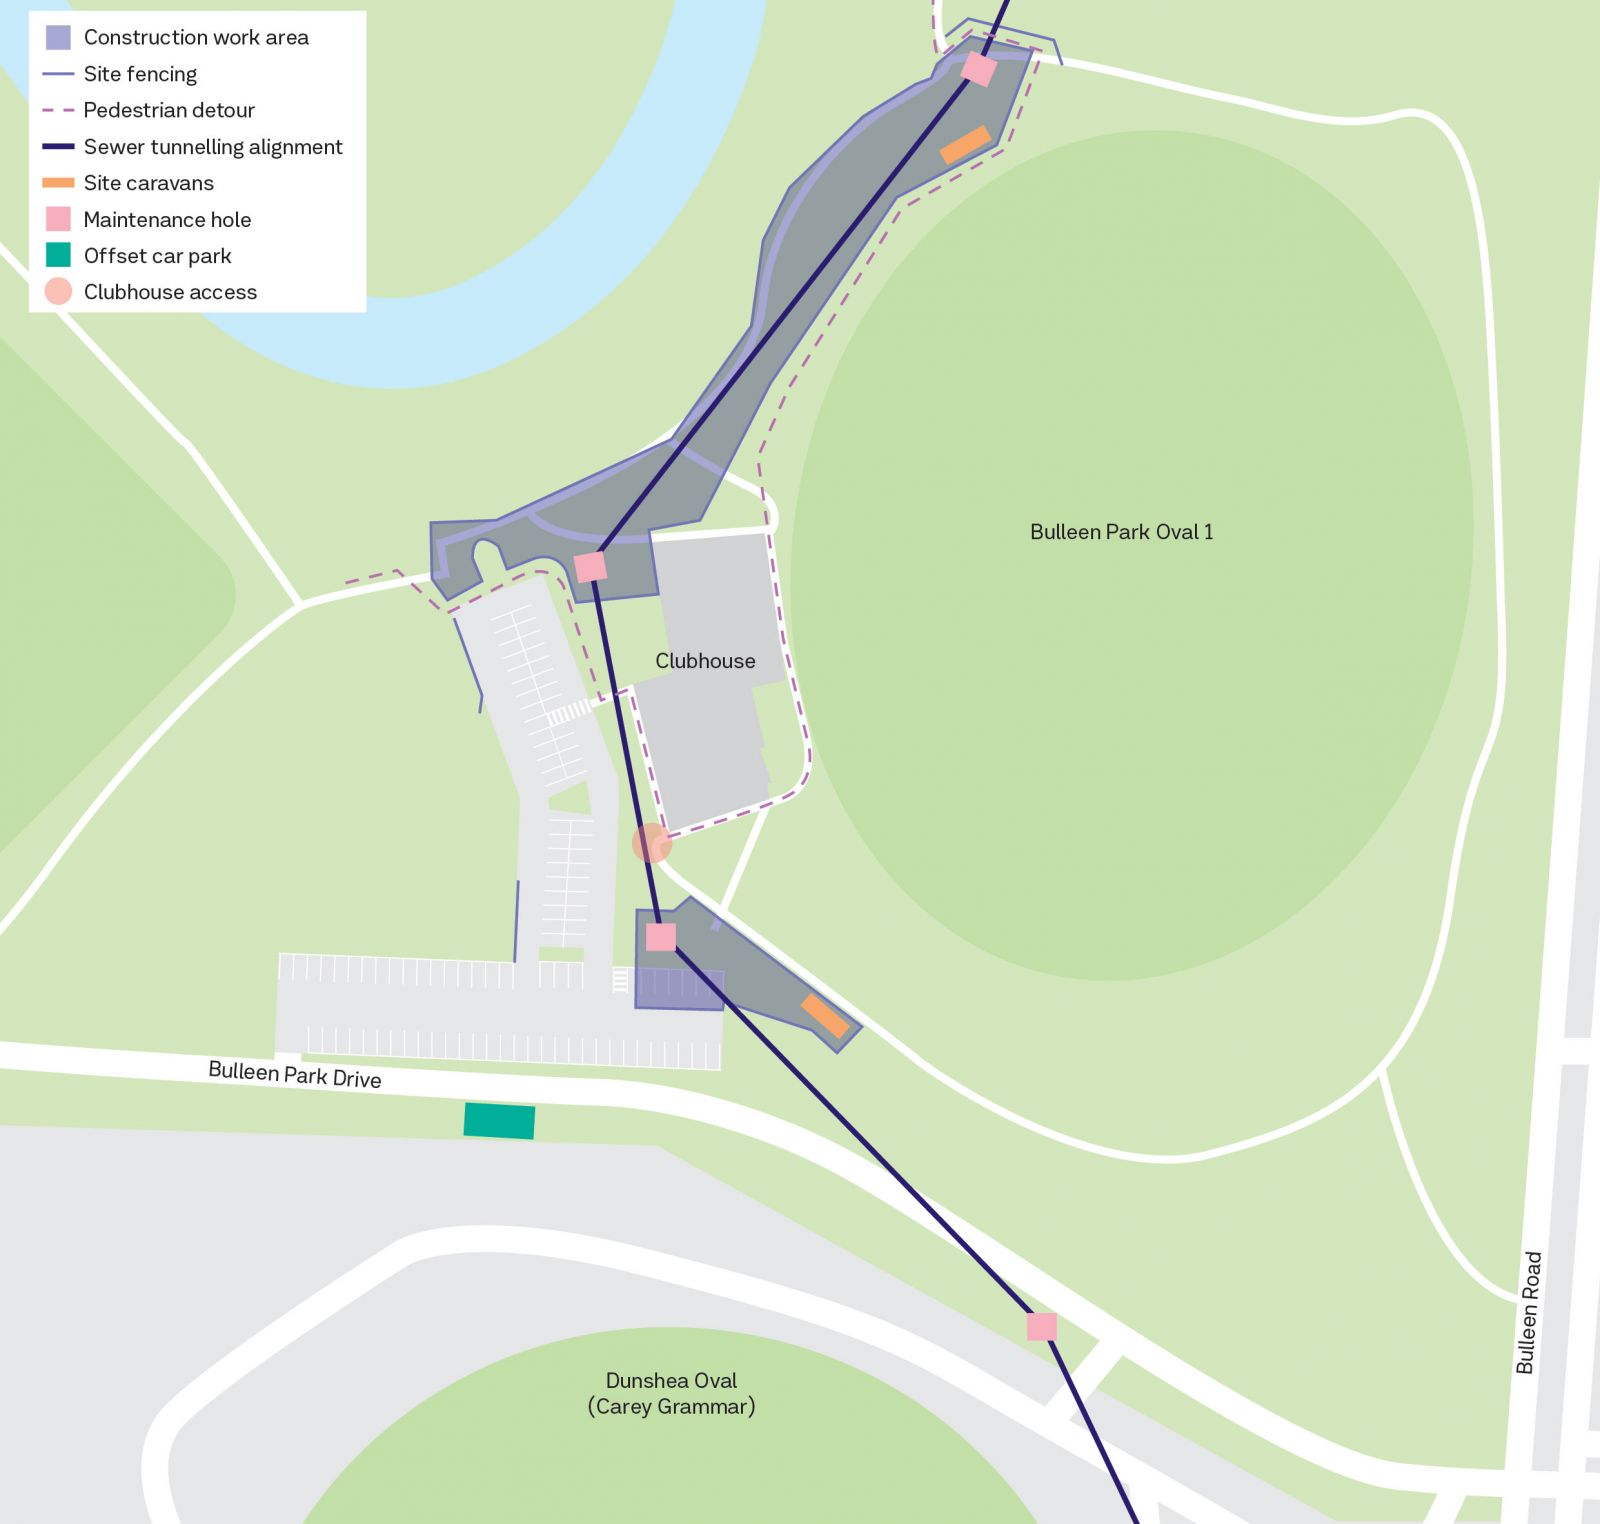 A map showing sewer works at Bulleen Park, highlighting construction work area, site fencing, pedestrian detour, sewer tunnelling alignment, site caravans, maintenance hole shaft, offset car park and clubhouse access.